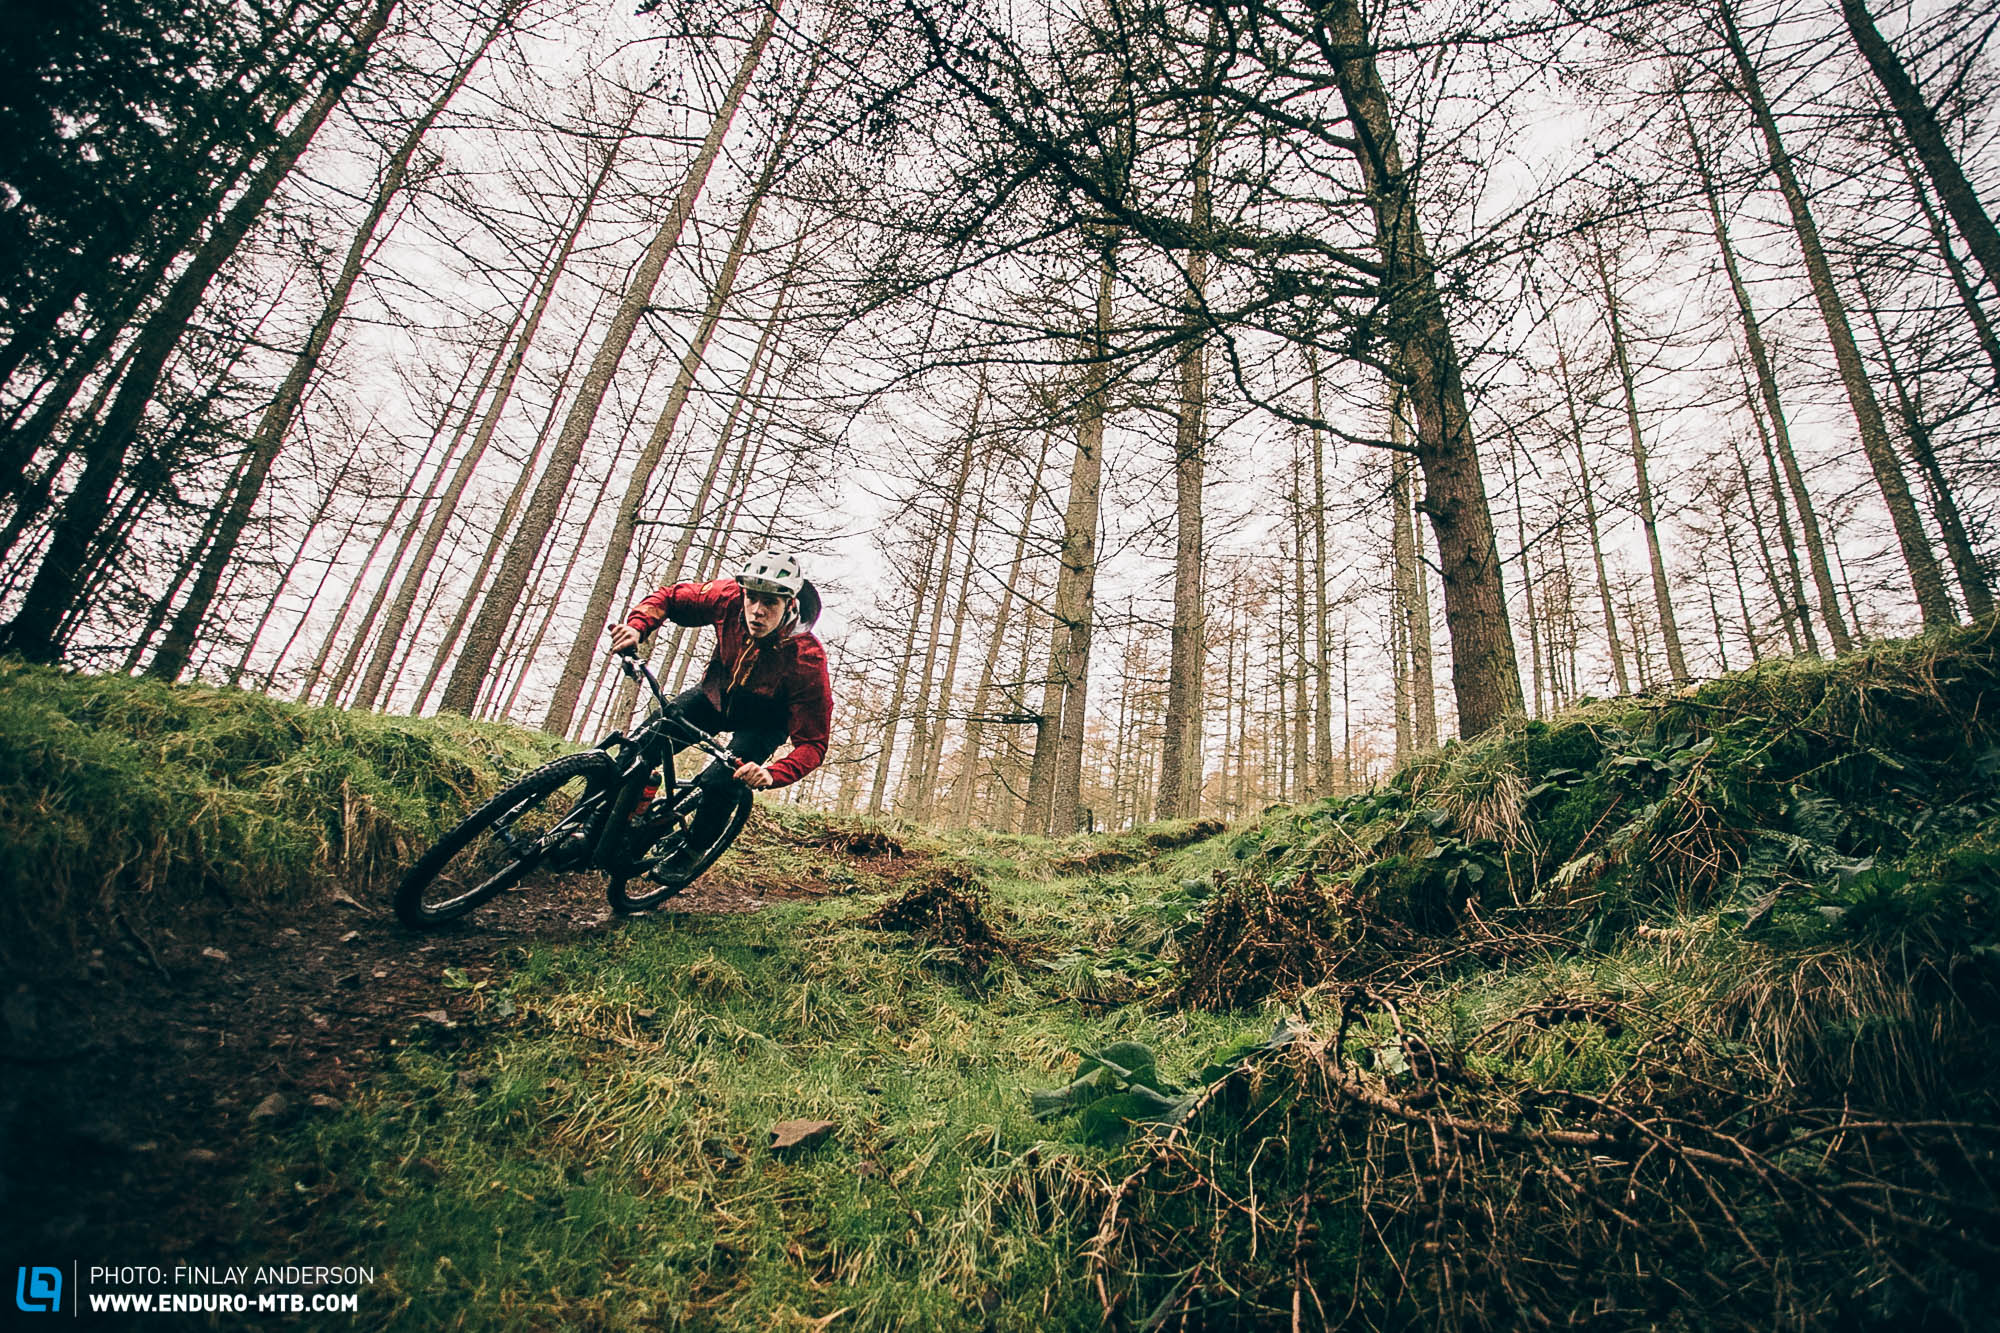 Mtb Riding Skills With These Tips You Can Take Your To